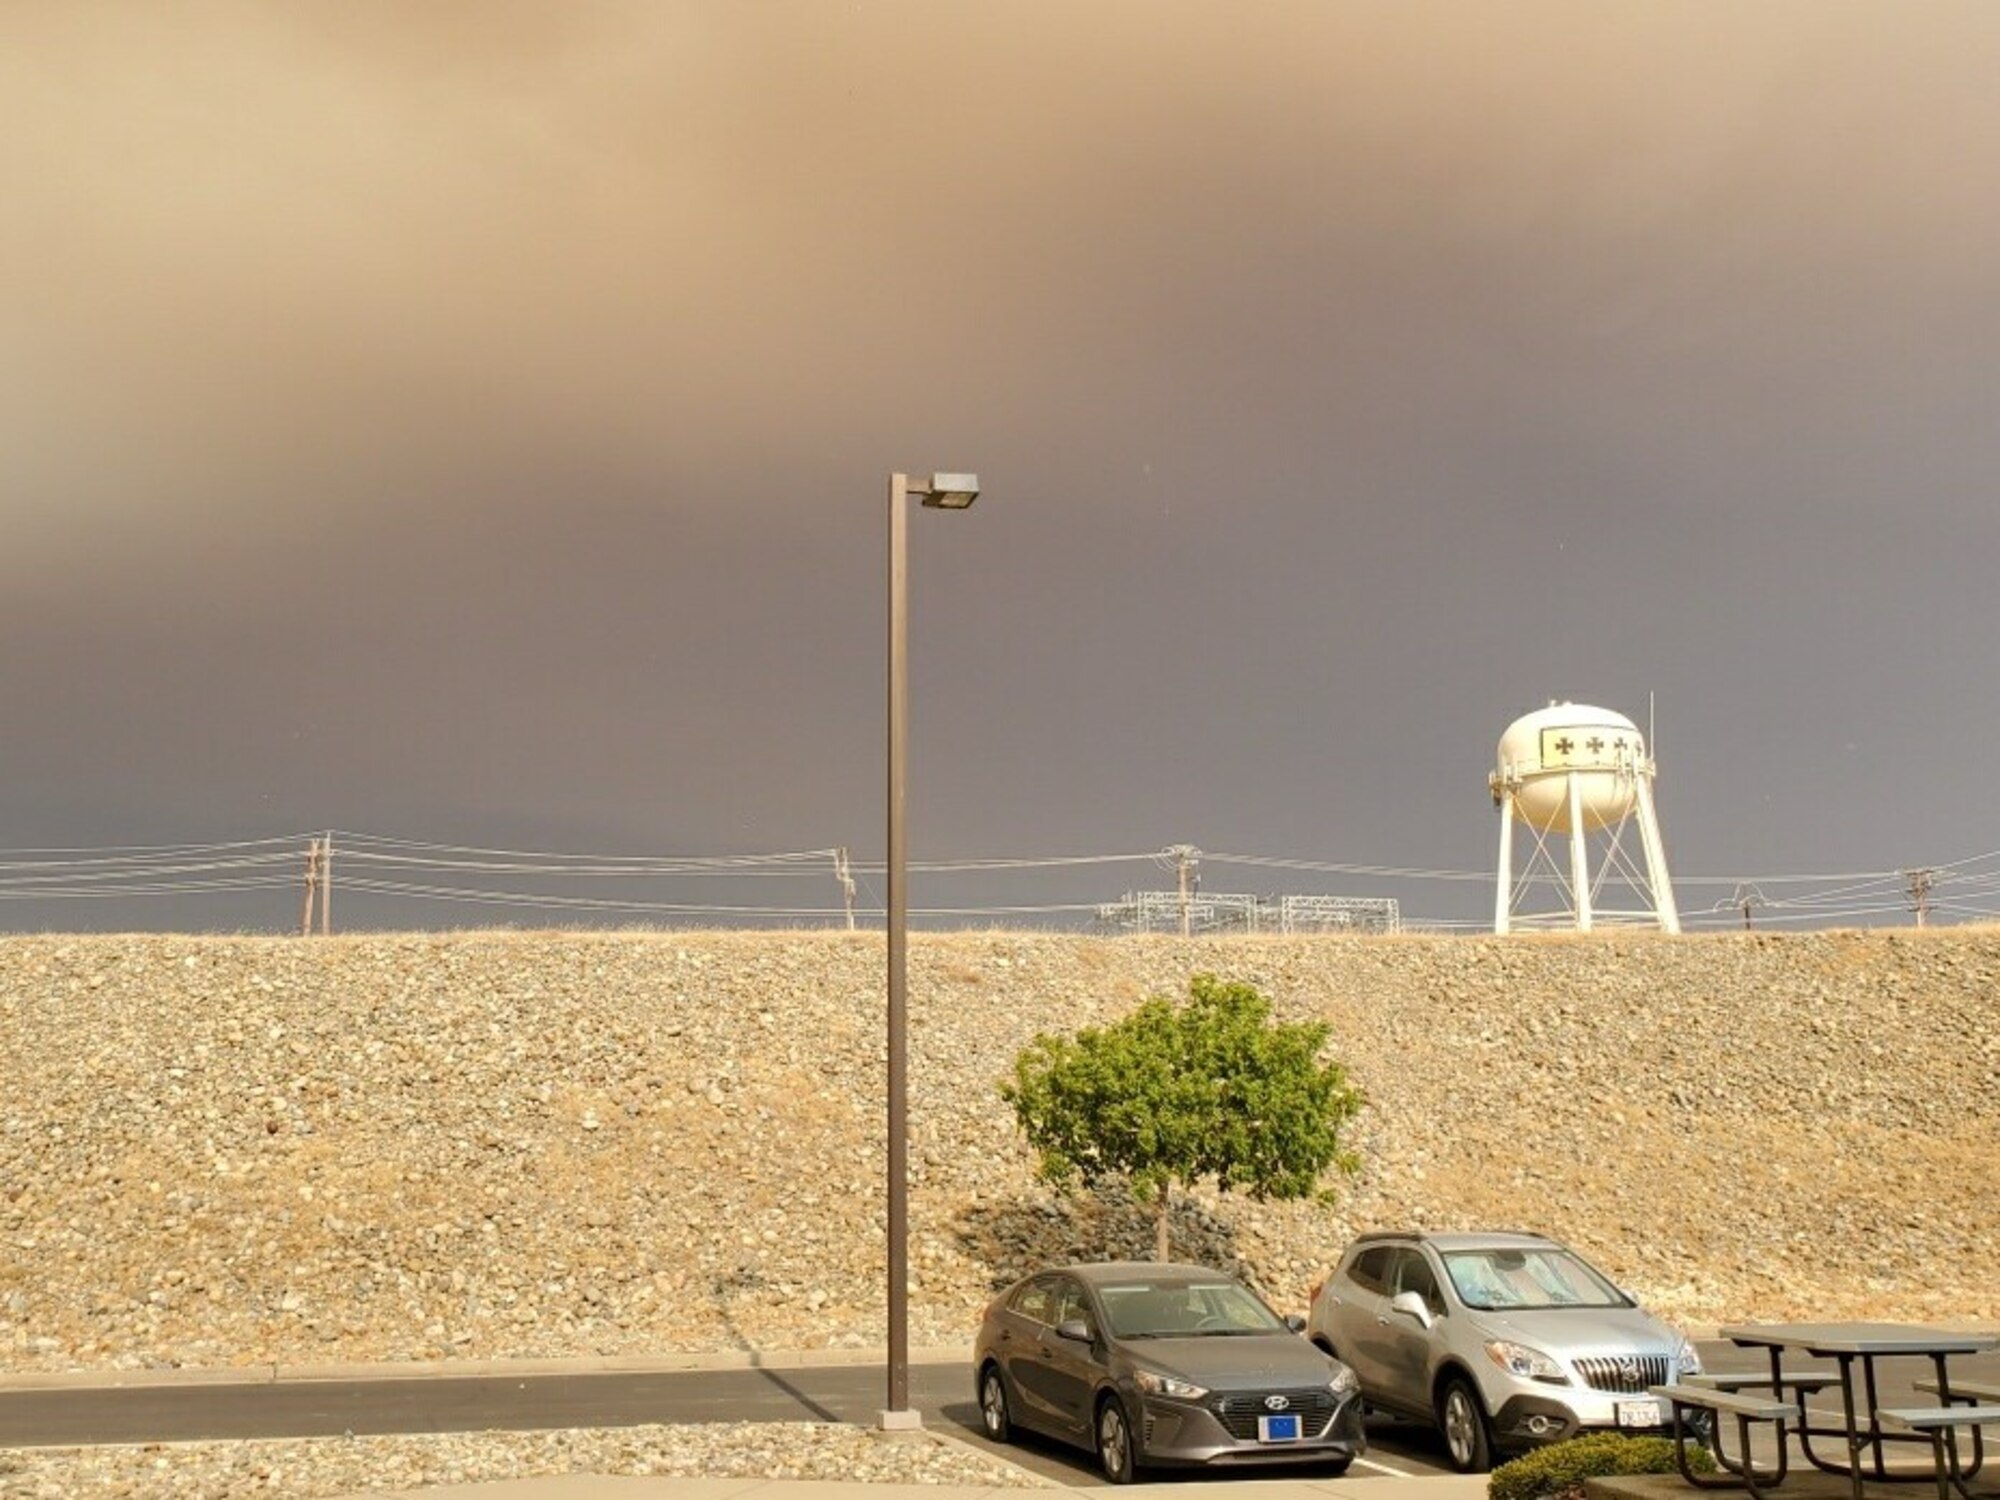 The smoke creates a contrast of color over Beale AFB. The view of the water tower shows a stark comparison to how thick the ash and smoke have become during this fire season.